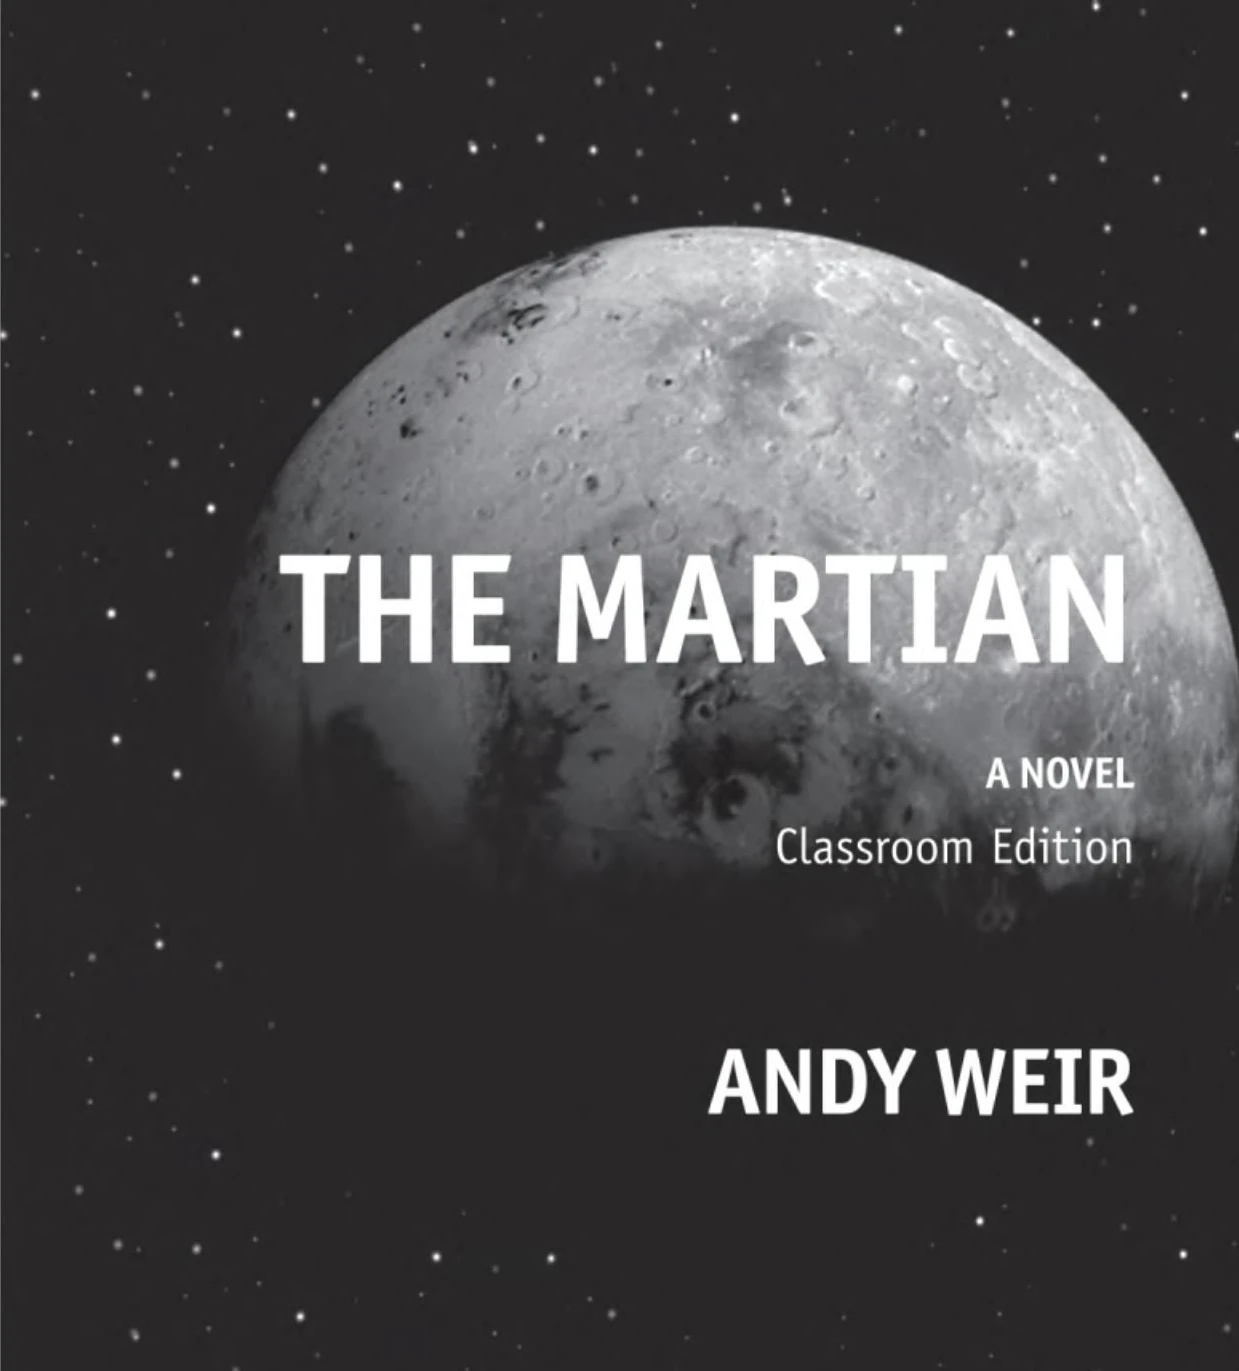 The Martian&quot; by Andy Weir